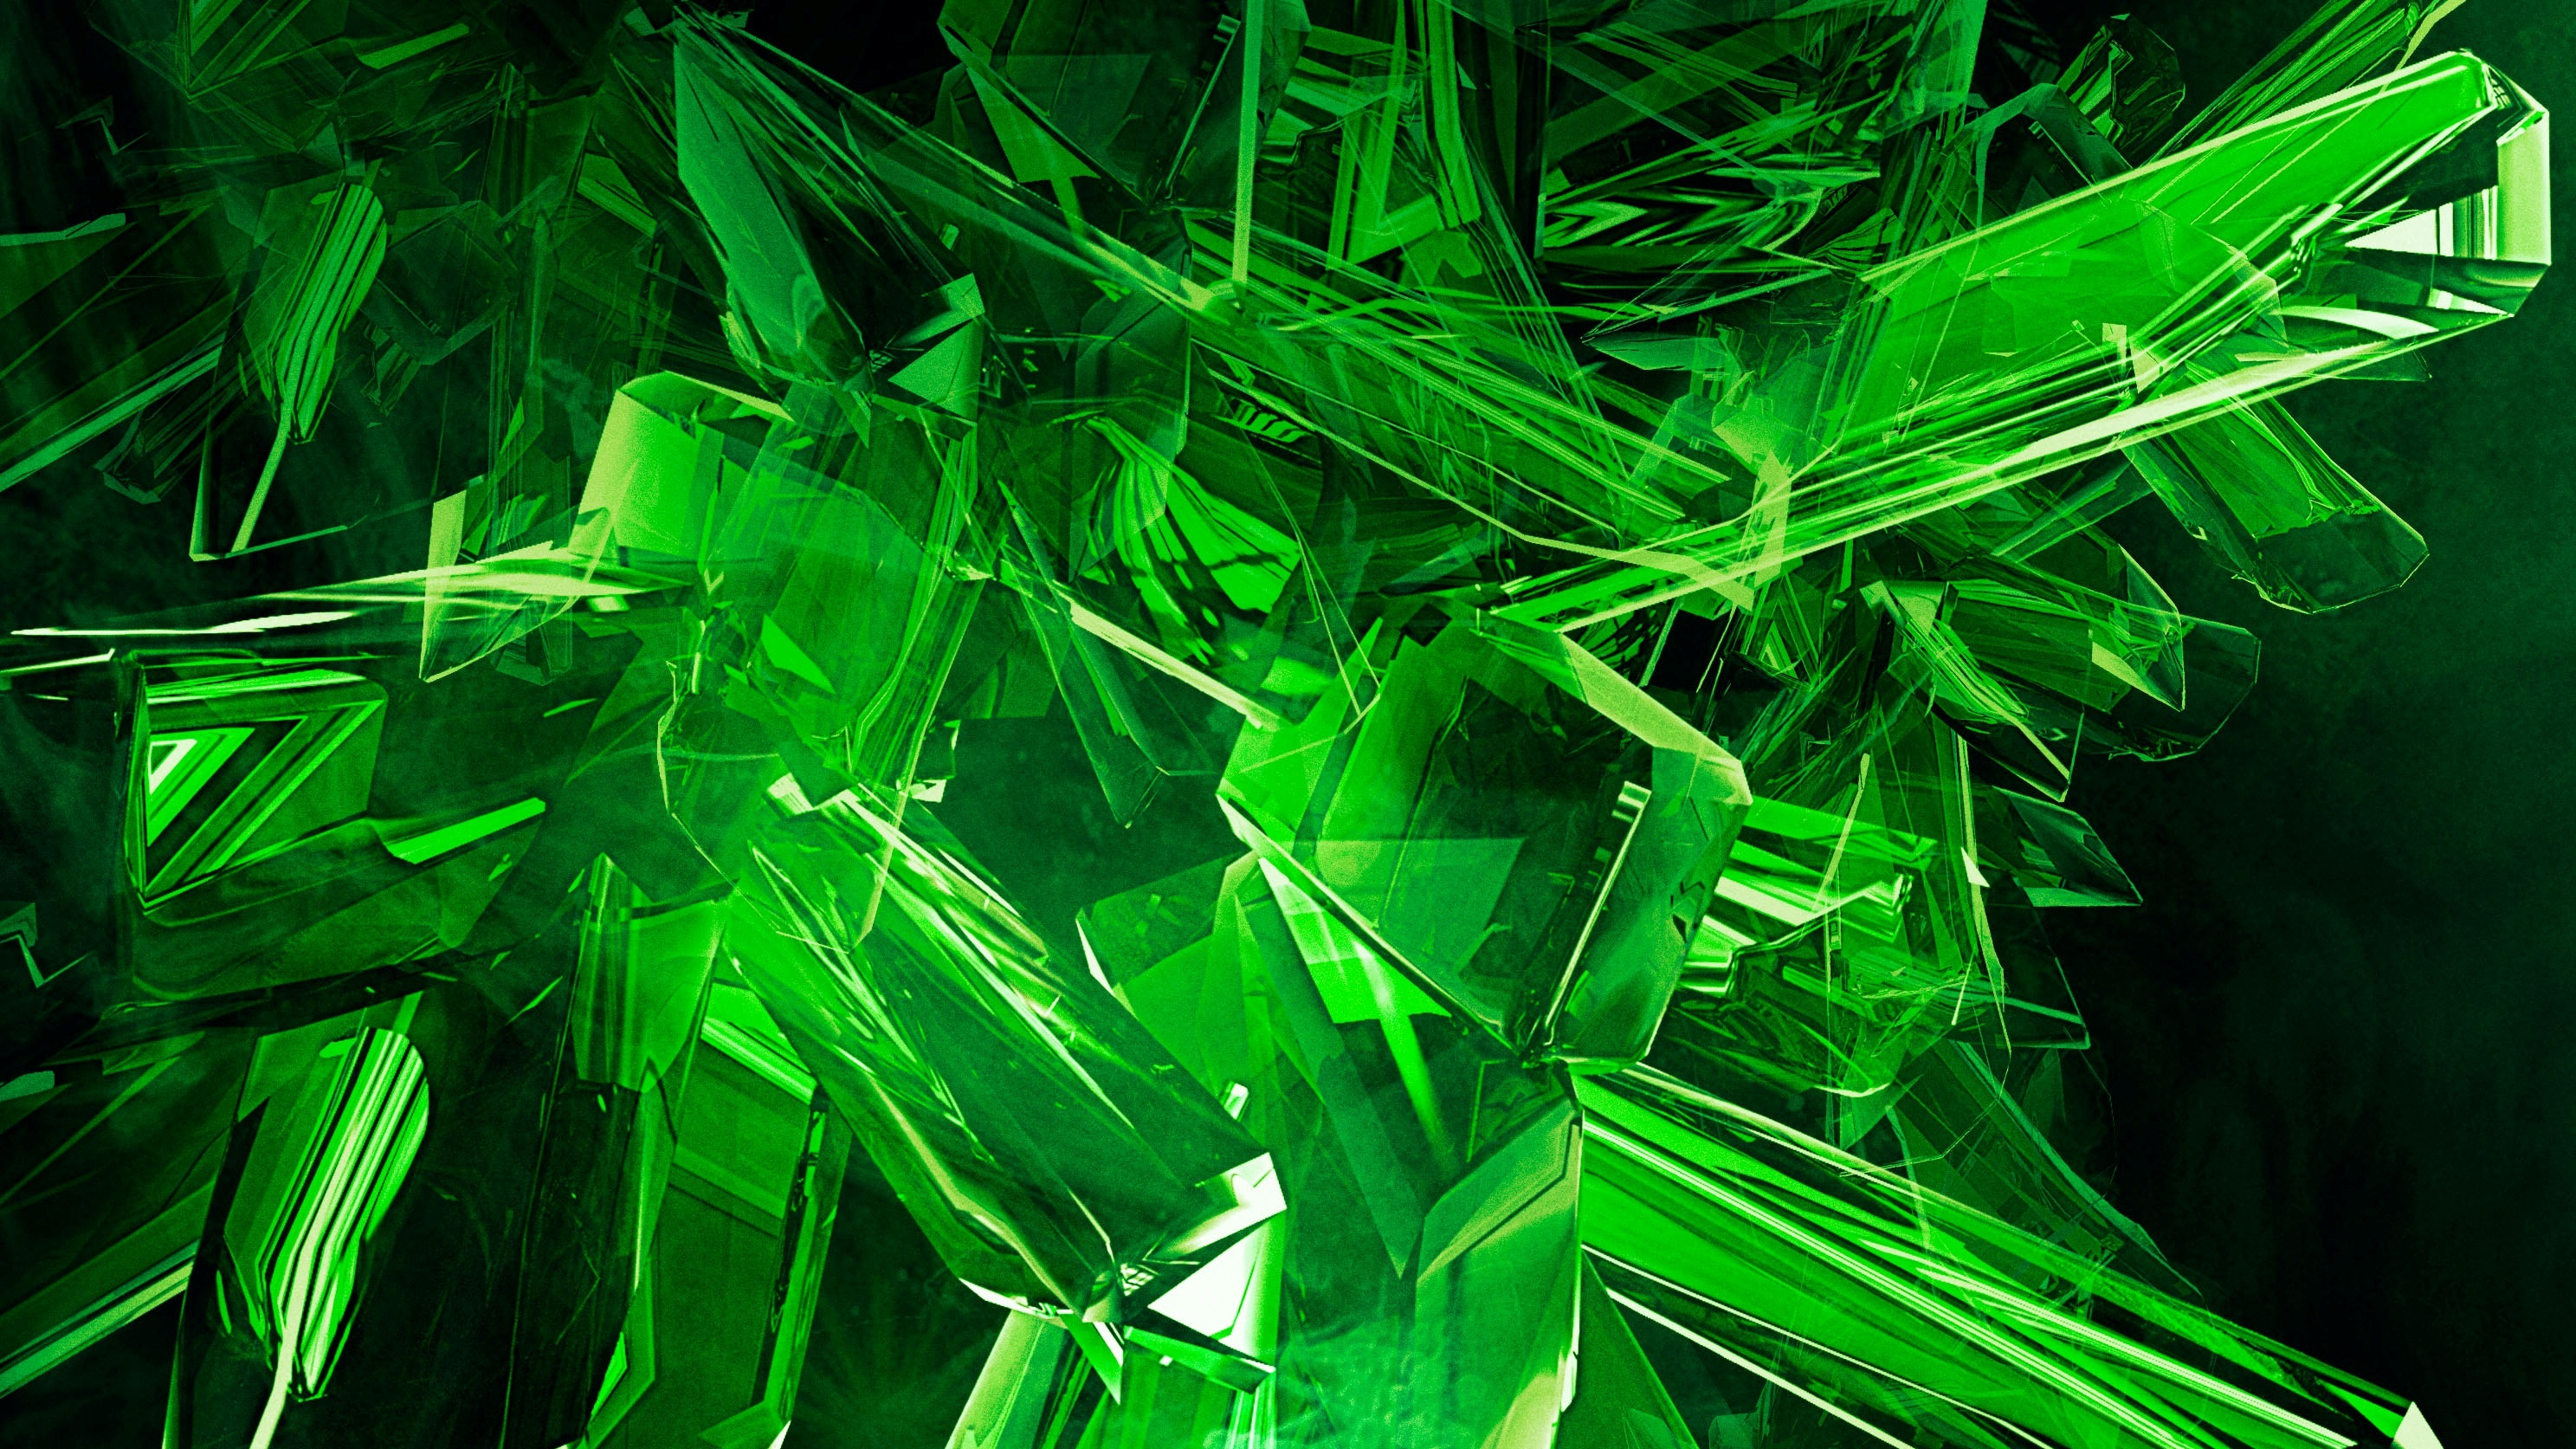  hd wallpaper Image Green View Abstract Gems Cool HD Wallpapers